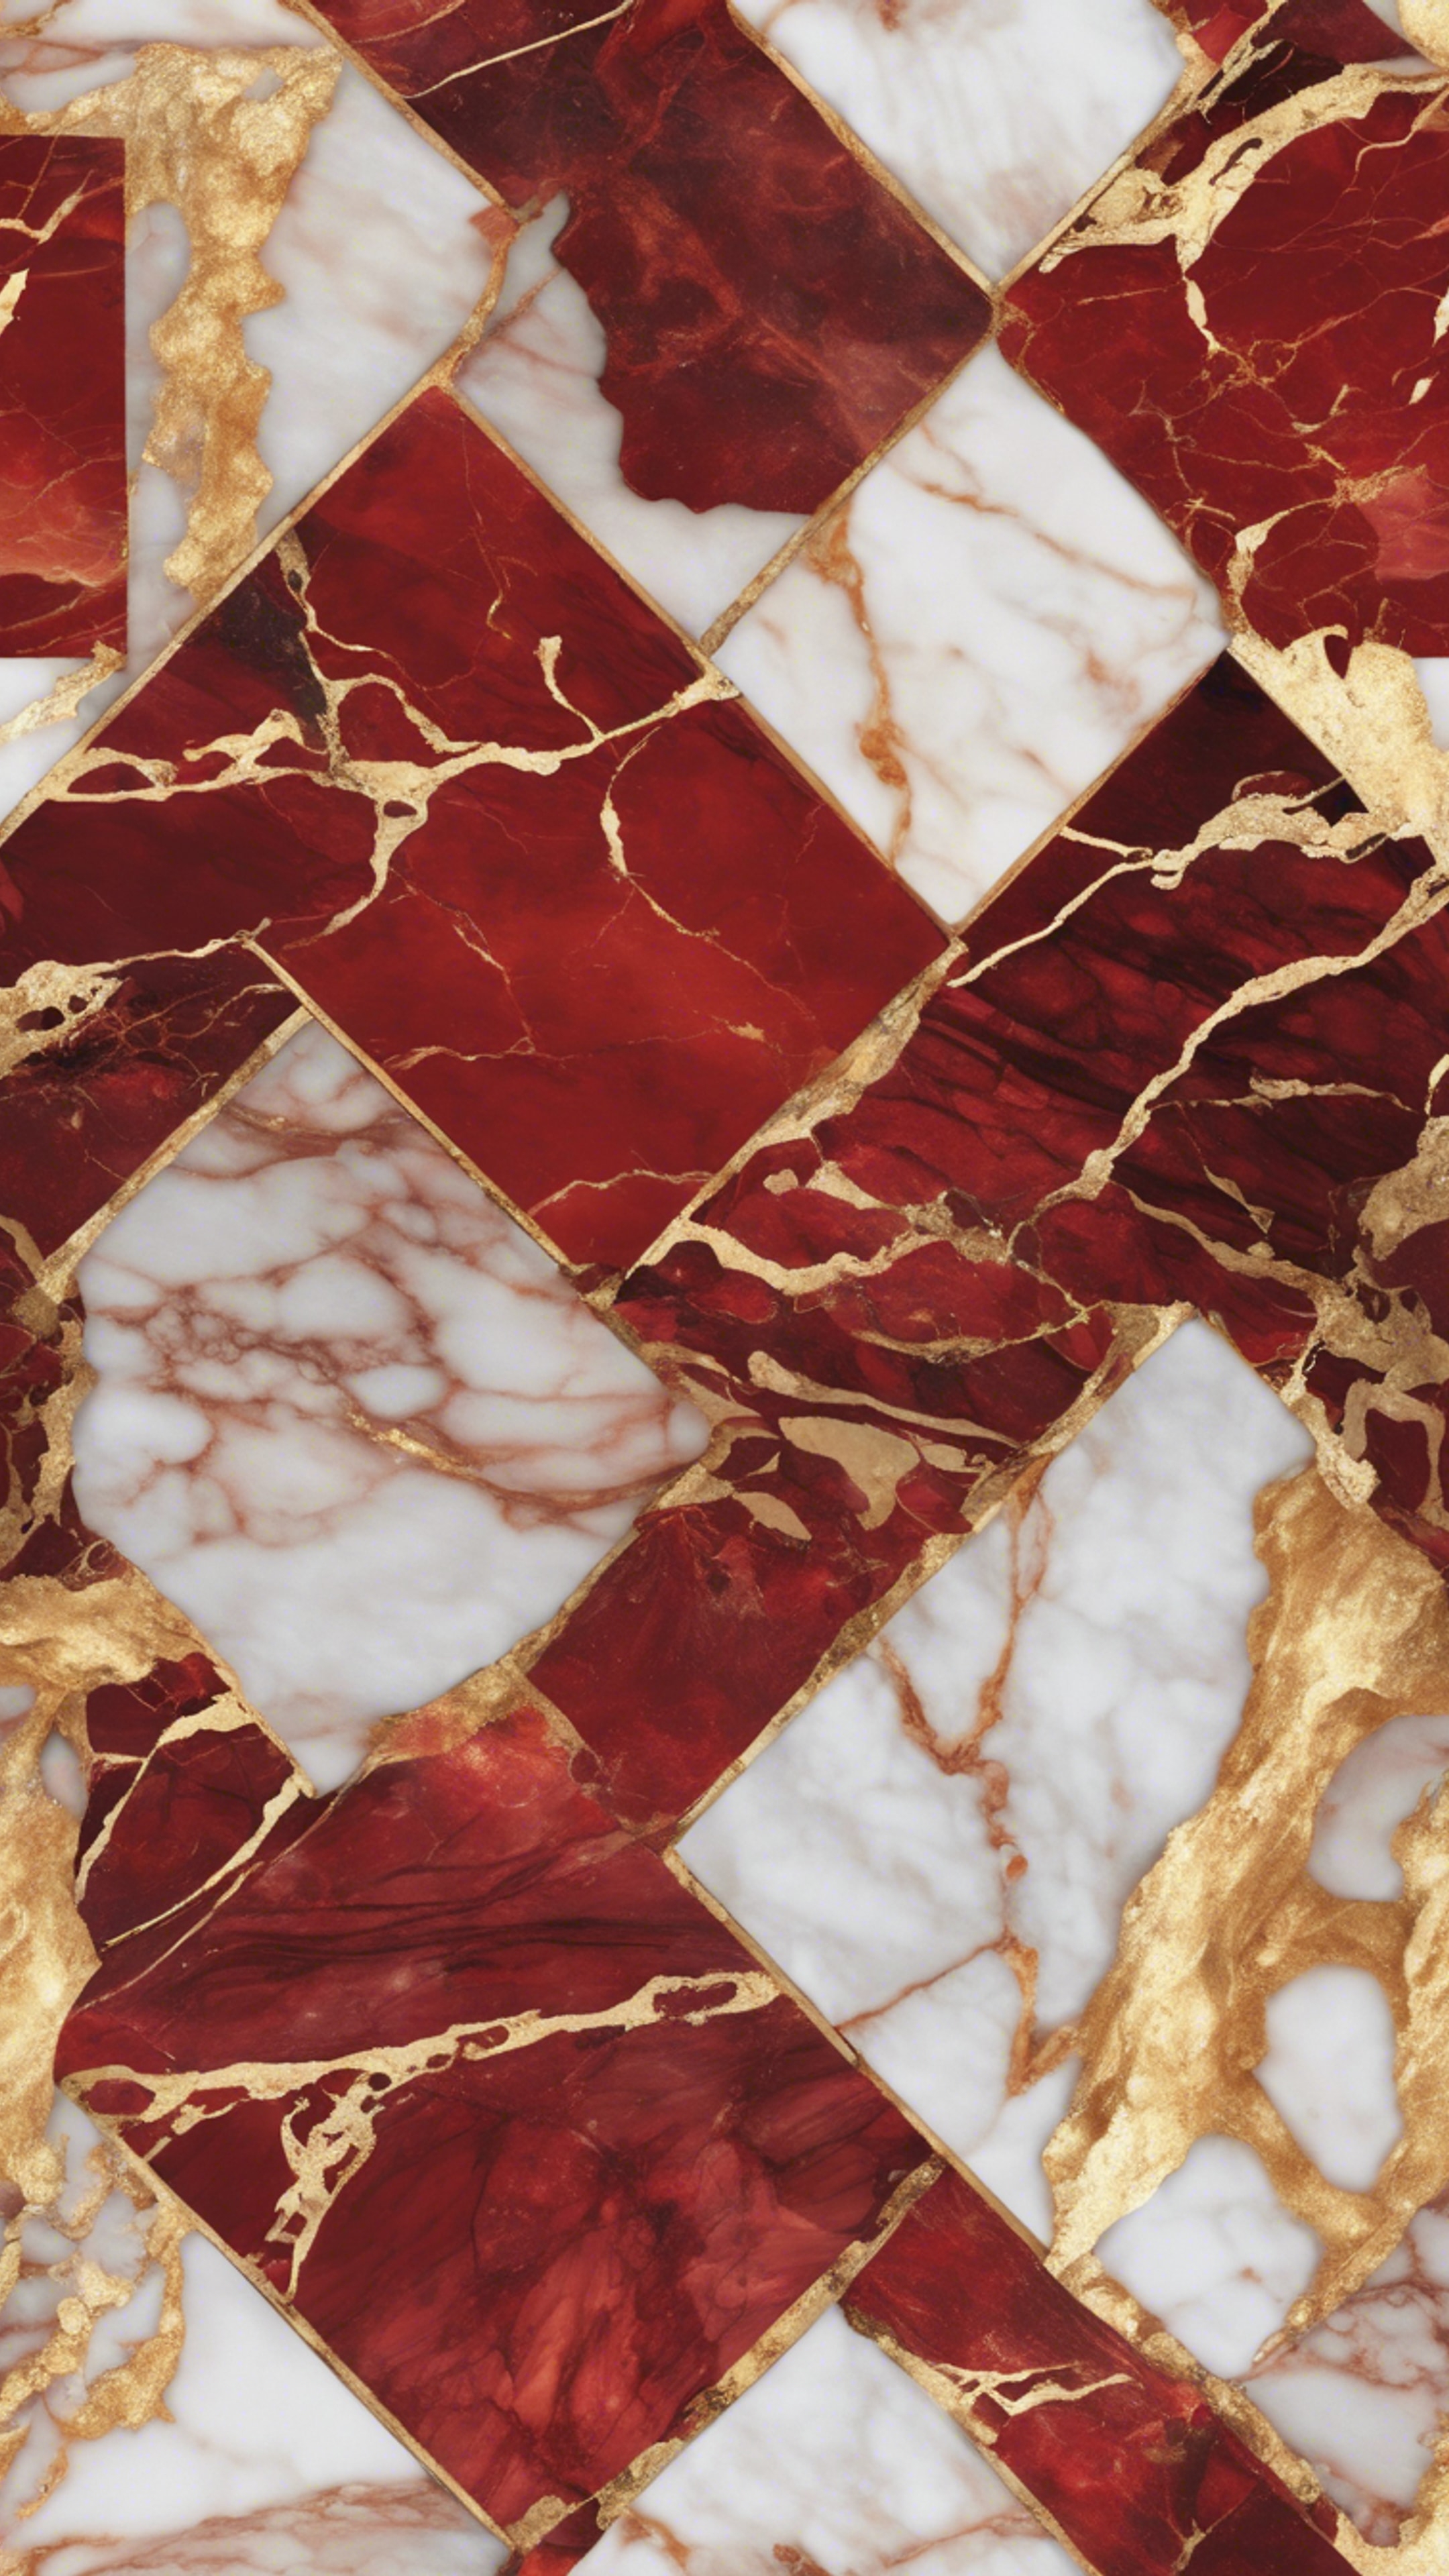 Seamless pattern of red and gold marble resembling the interior of an opulent mansion.壁紙[0c55d253d85d467eb81b]